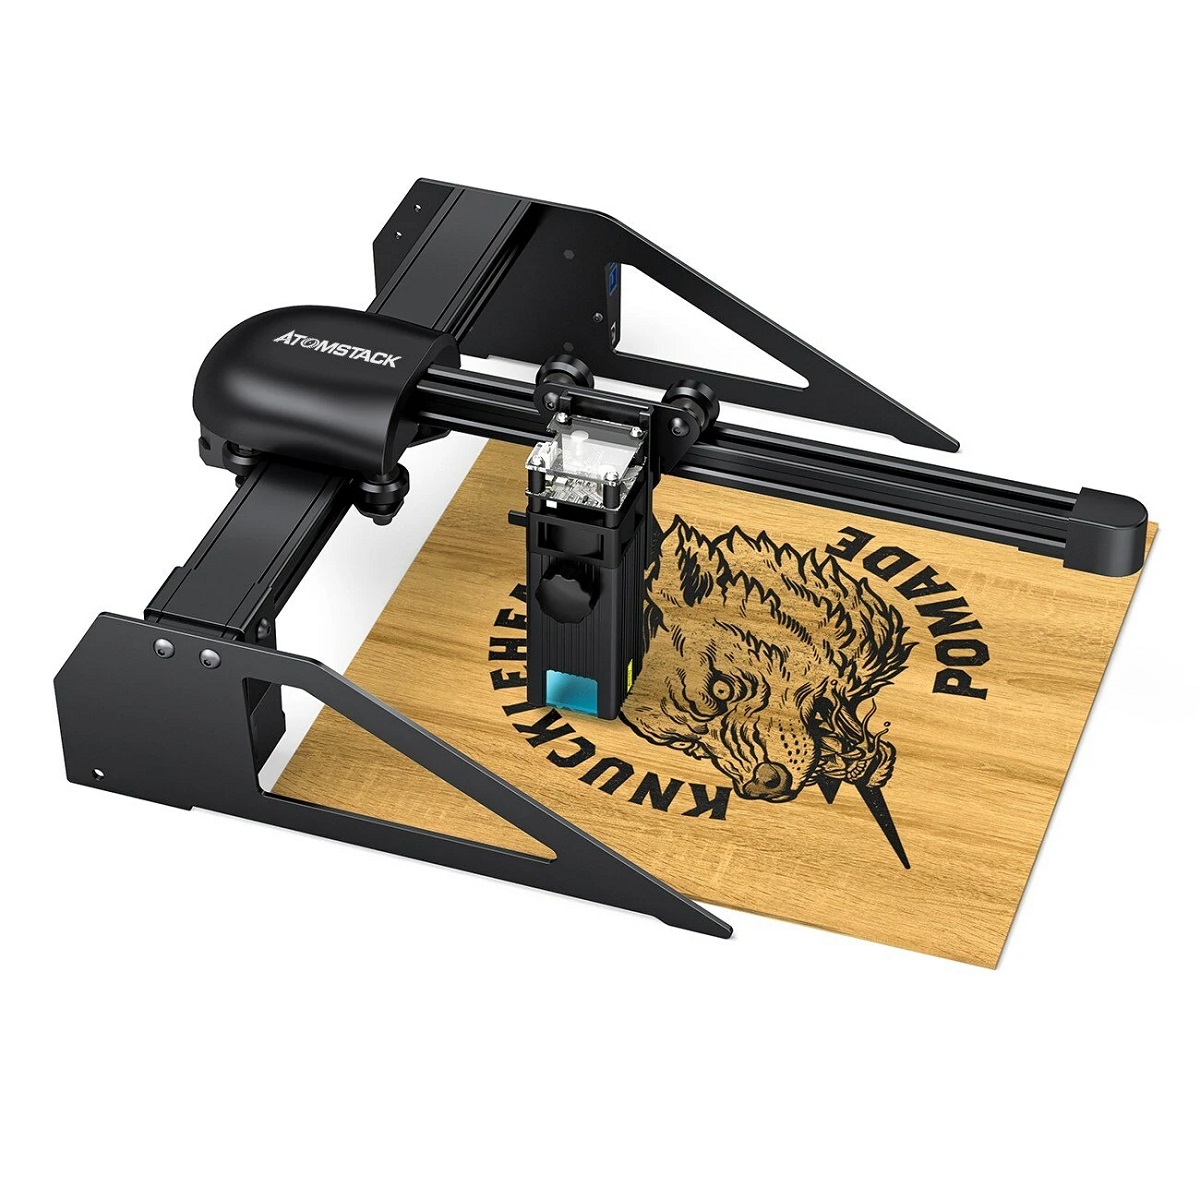 Find EU DIRECT ATOMSTACK P7 M30 Portable Laser Engraving Machine Cutter Wood Cutting Single Arm Laser Engraver Eye Protection Metal Engraving for Sale on Gipsybee.com with cryptocurrencies